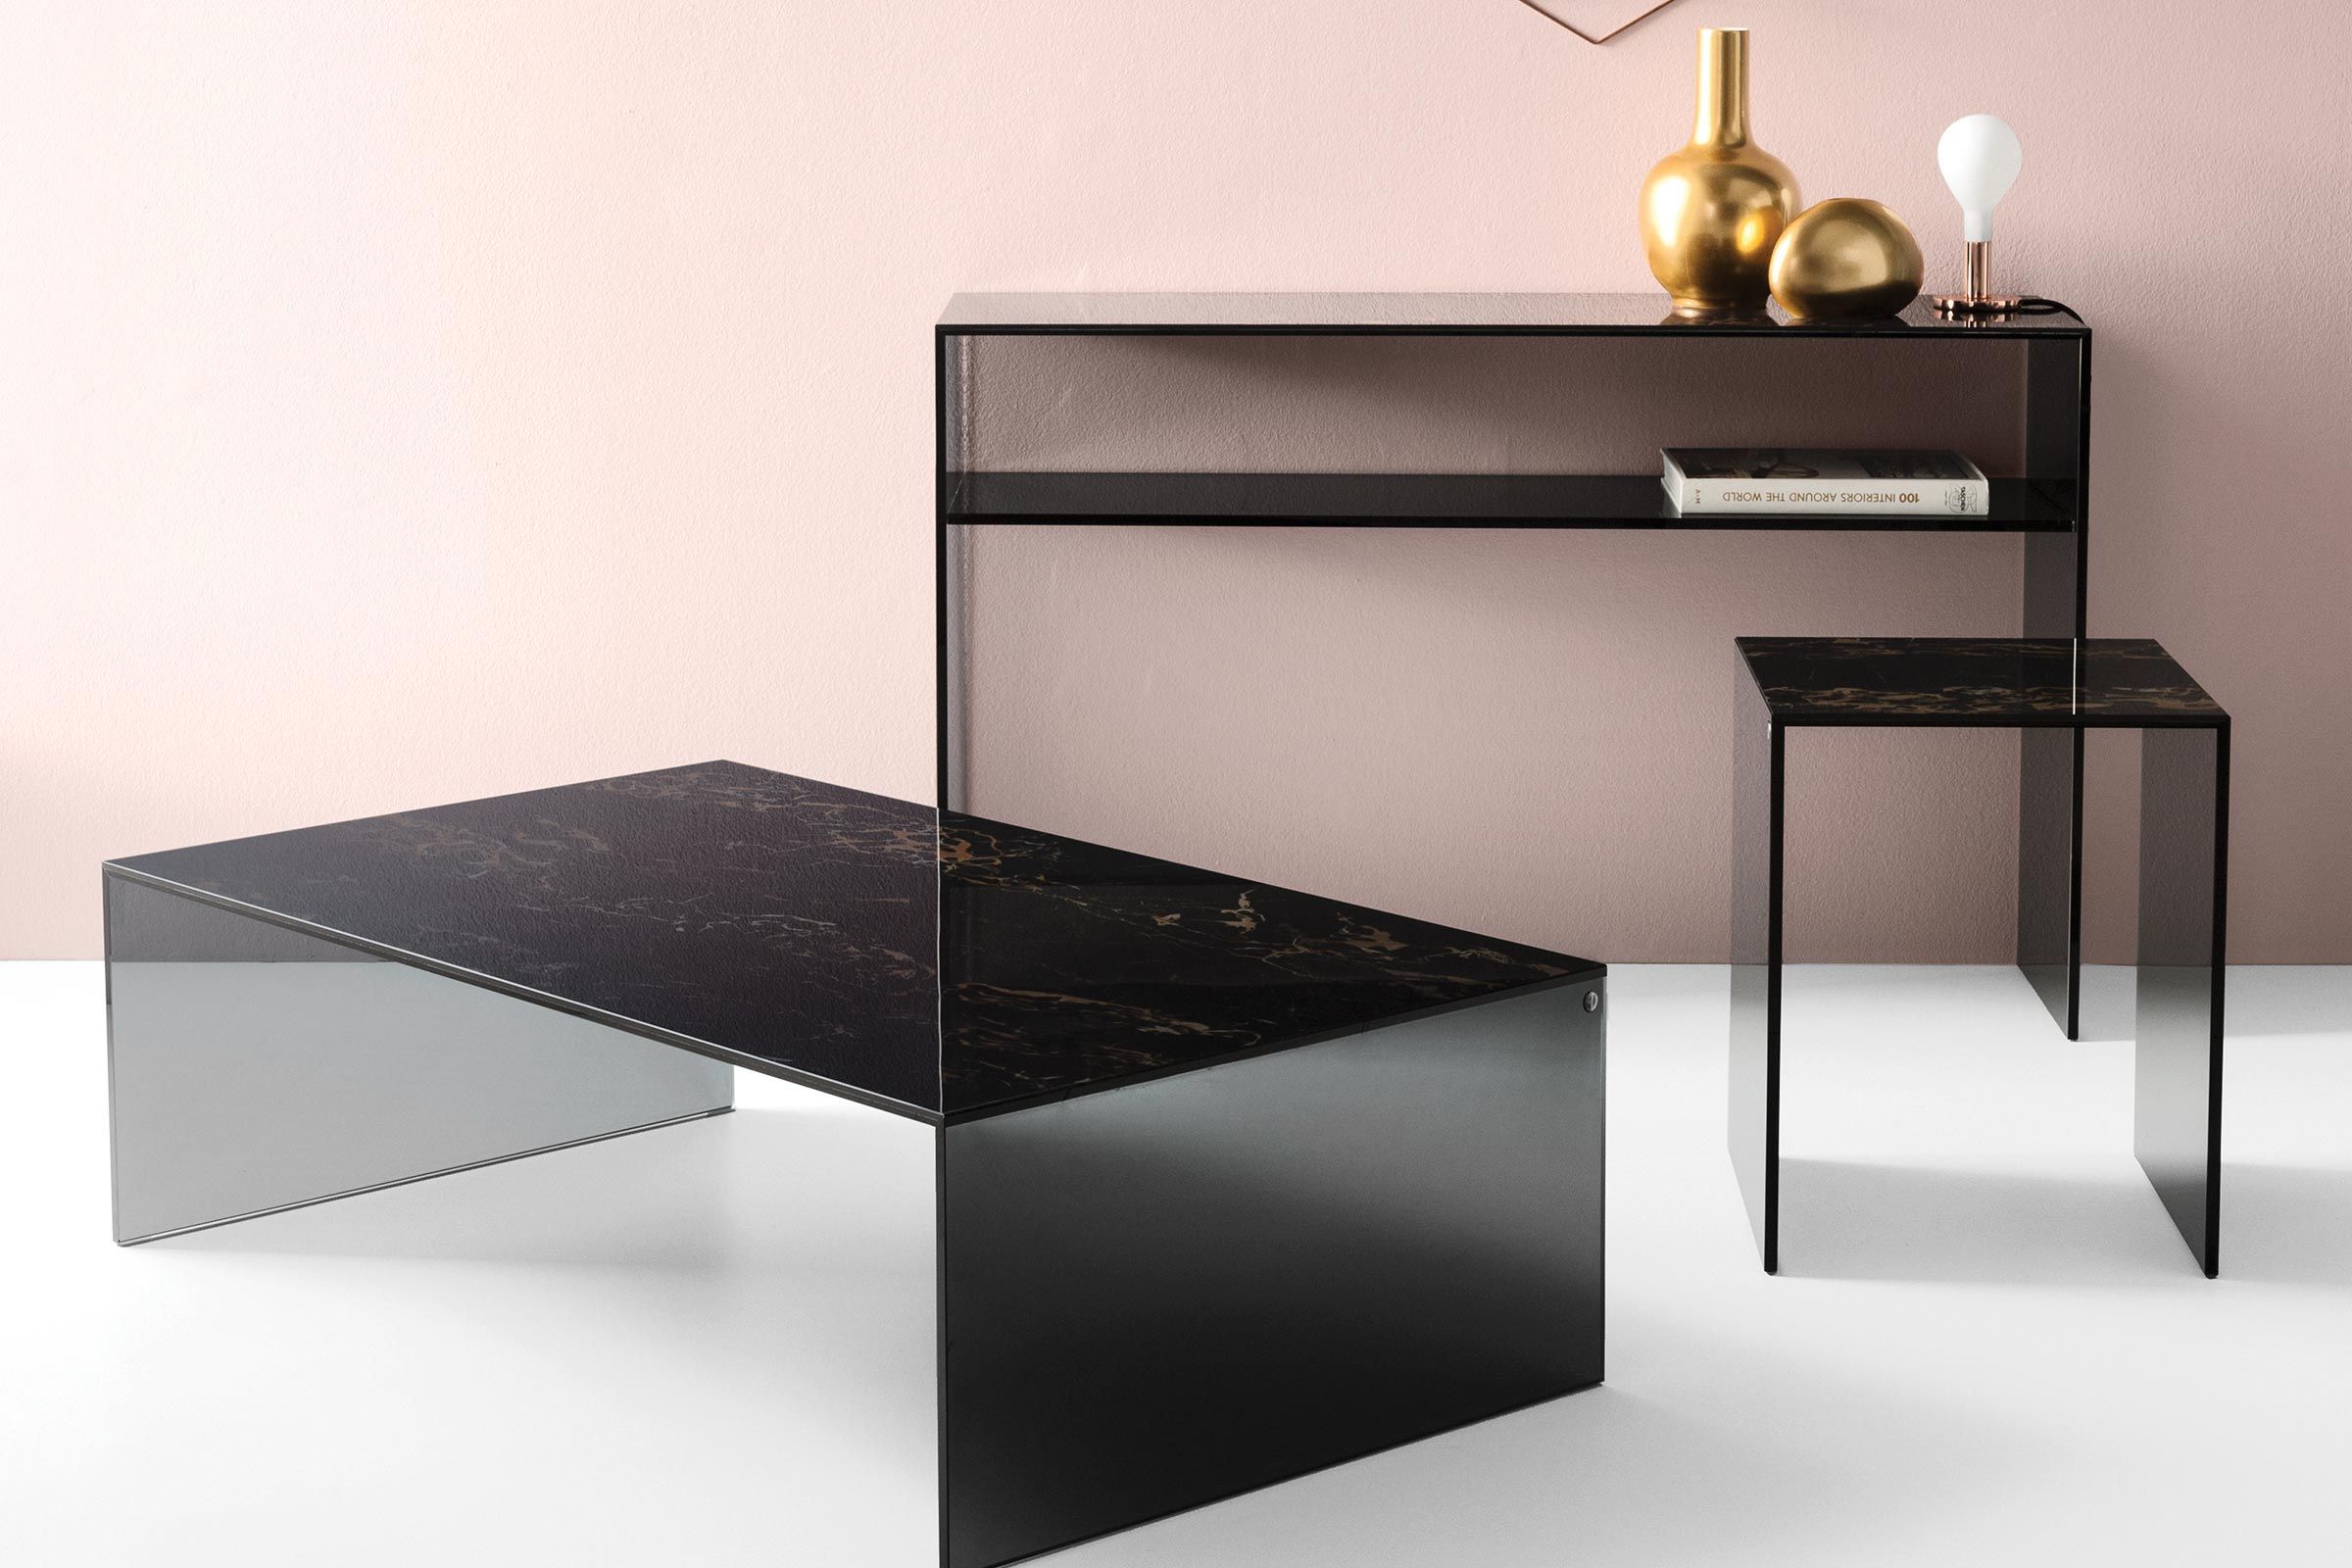 With Simple, Geometric Lines, The Bridge Console Table Features With Regard To Geometric Console Tables (View 11 of 20)